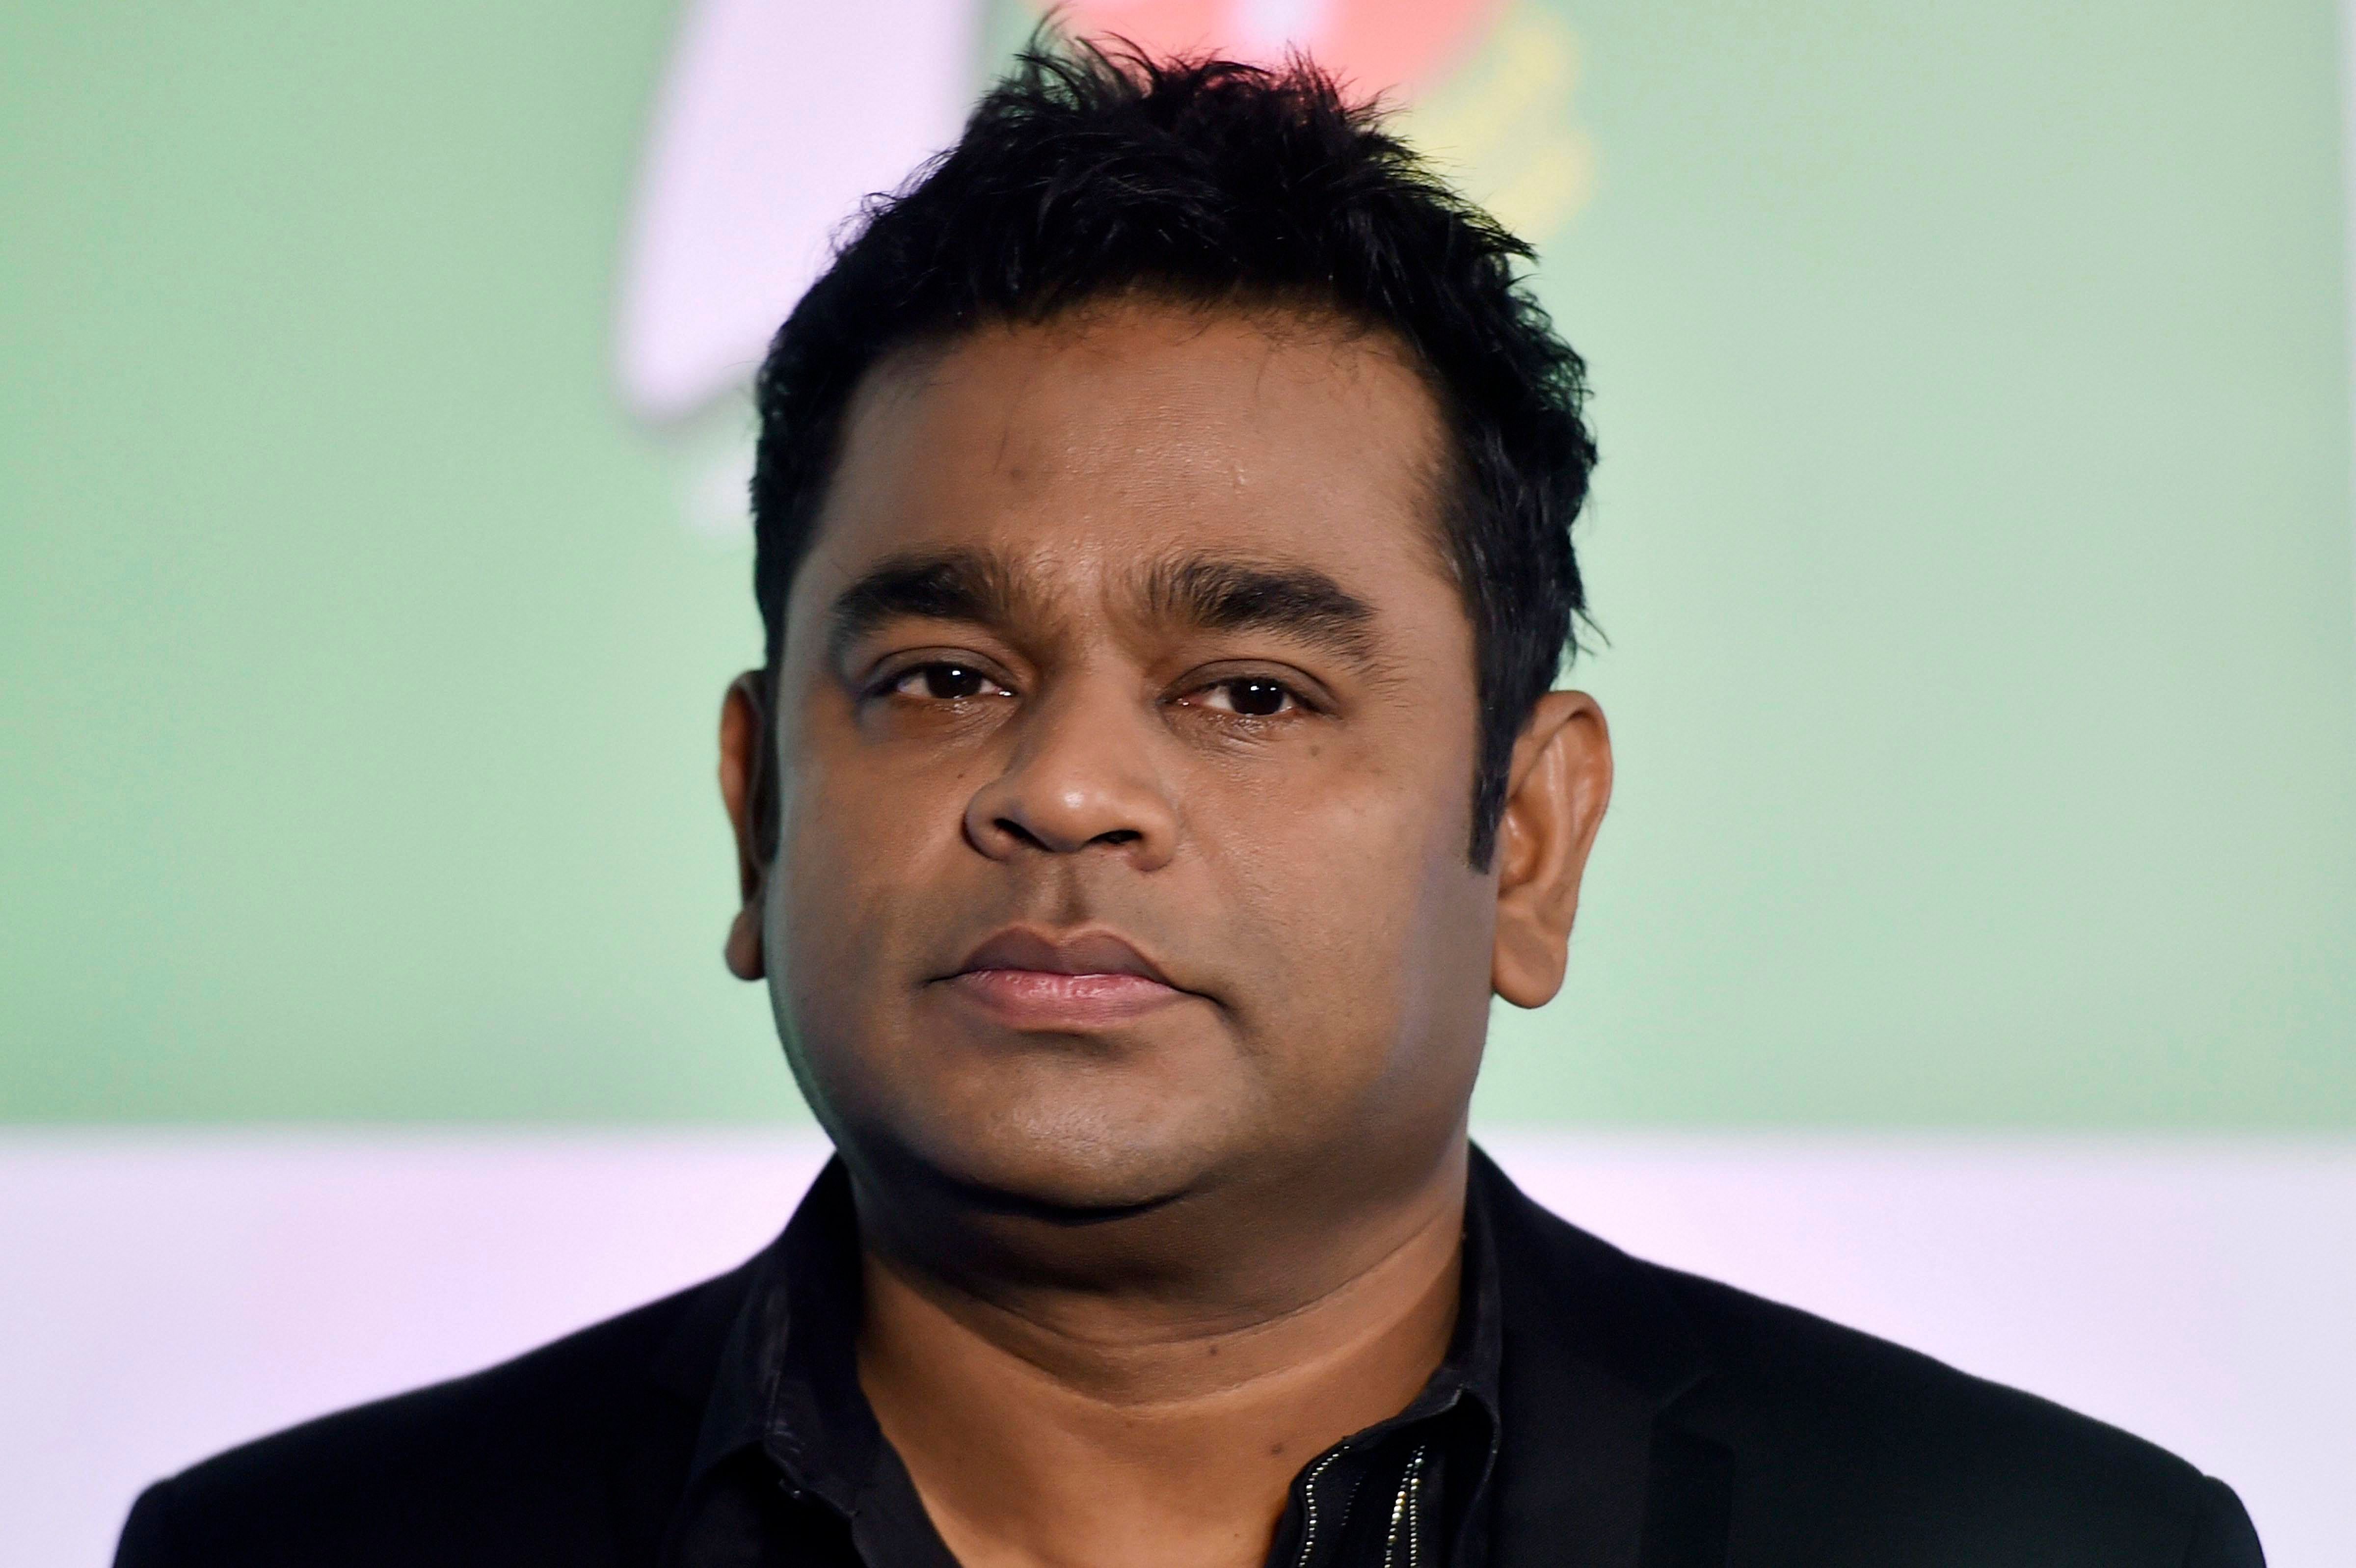 A R Rahman said there has been "misunderstanding" between him and filmmakers as some people have been spreading "false rumours" about him in the industry. Credit: PTI File Photo